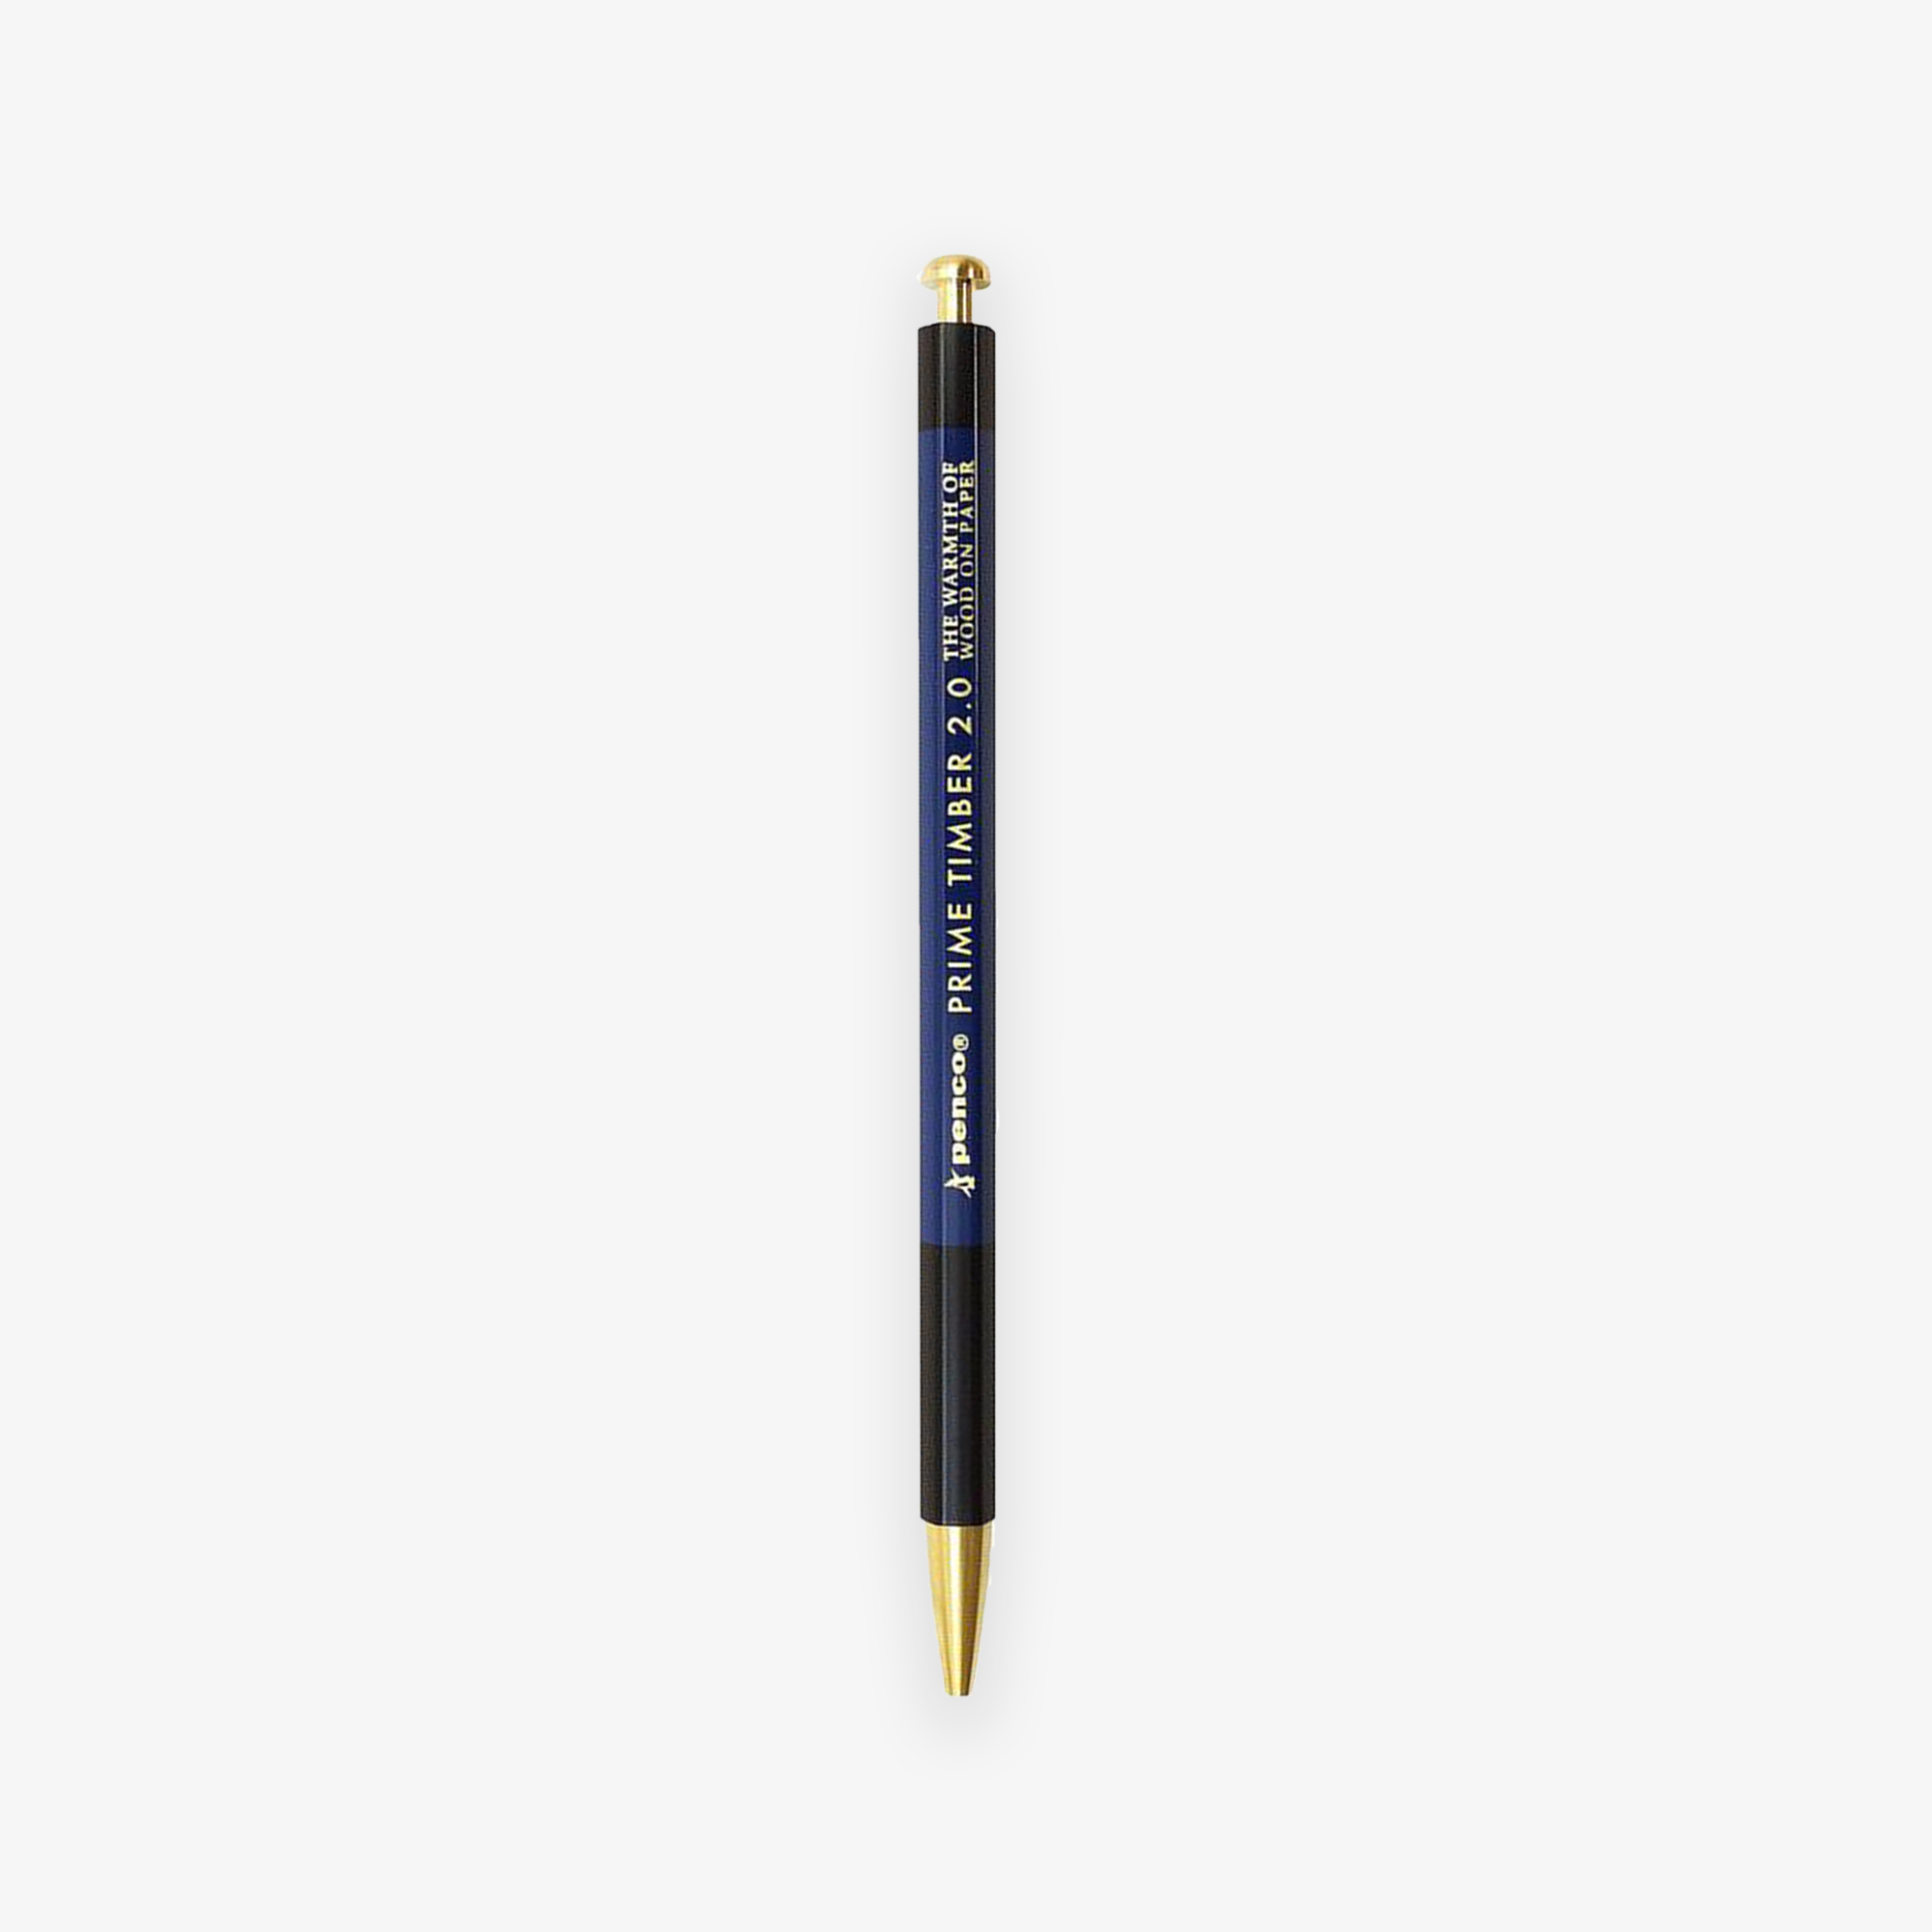 PRIME TIMBER PENCIL 2.0 mm // BRASS NAVY